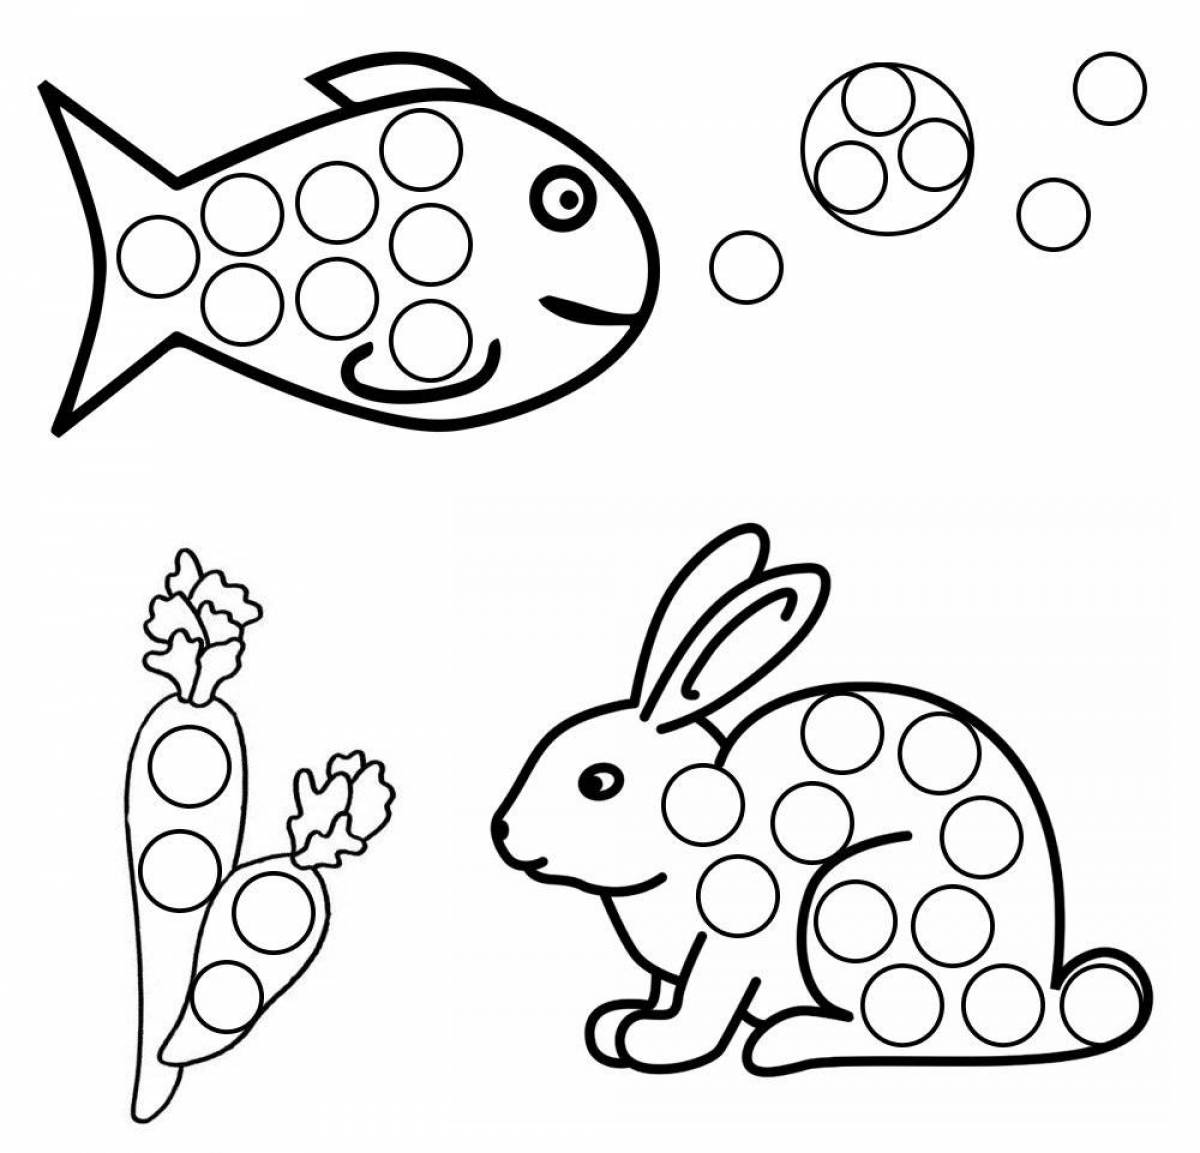 Colorful finger coloring page